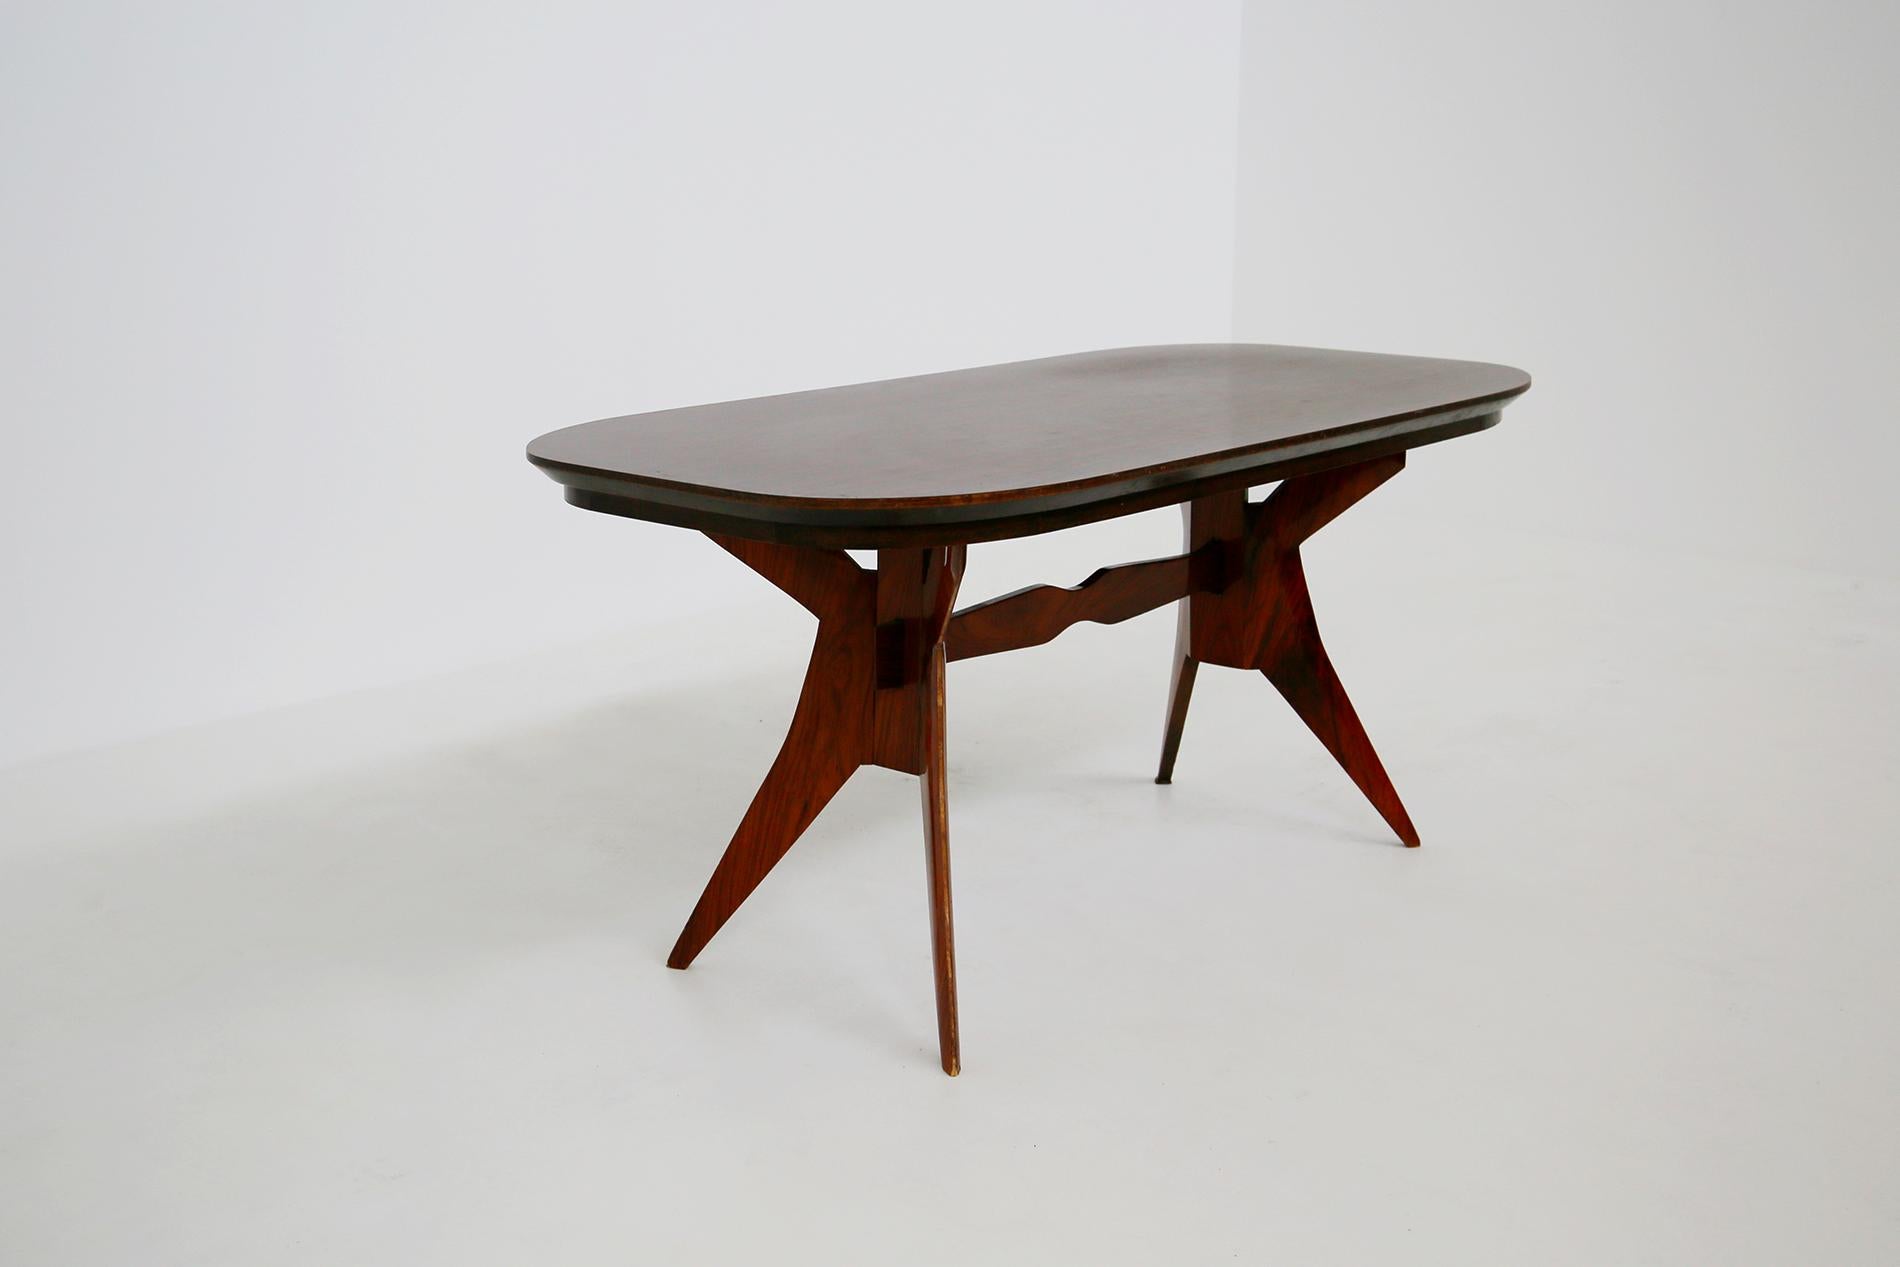 Geometric Italian table of the Turin school of 1950.The table is made of an elegant and well defined wood. Its top is elliptical in good condition. The peculiarity of the table lies in its sculptural legs with geometric shapes, an elegant game of